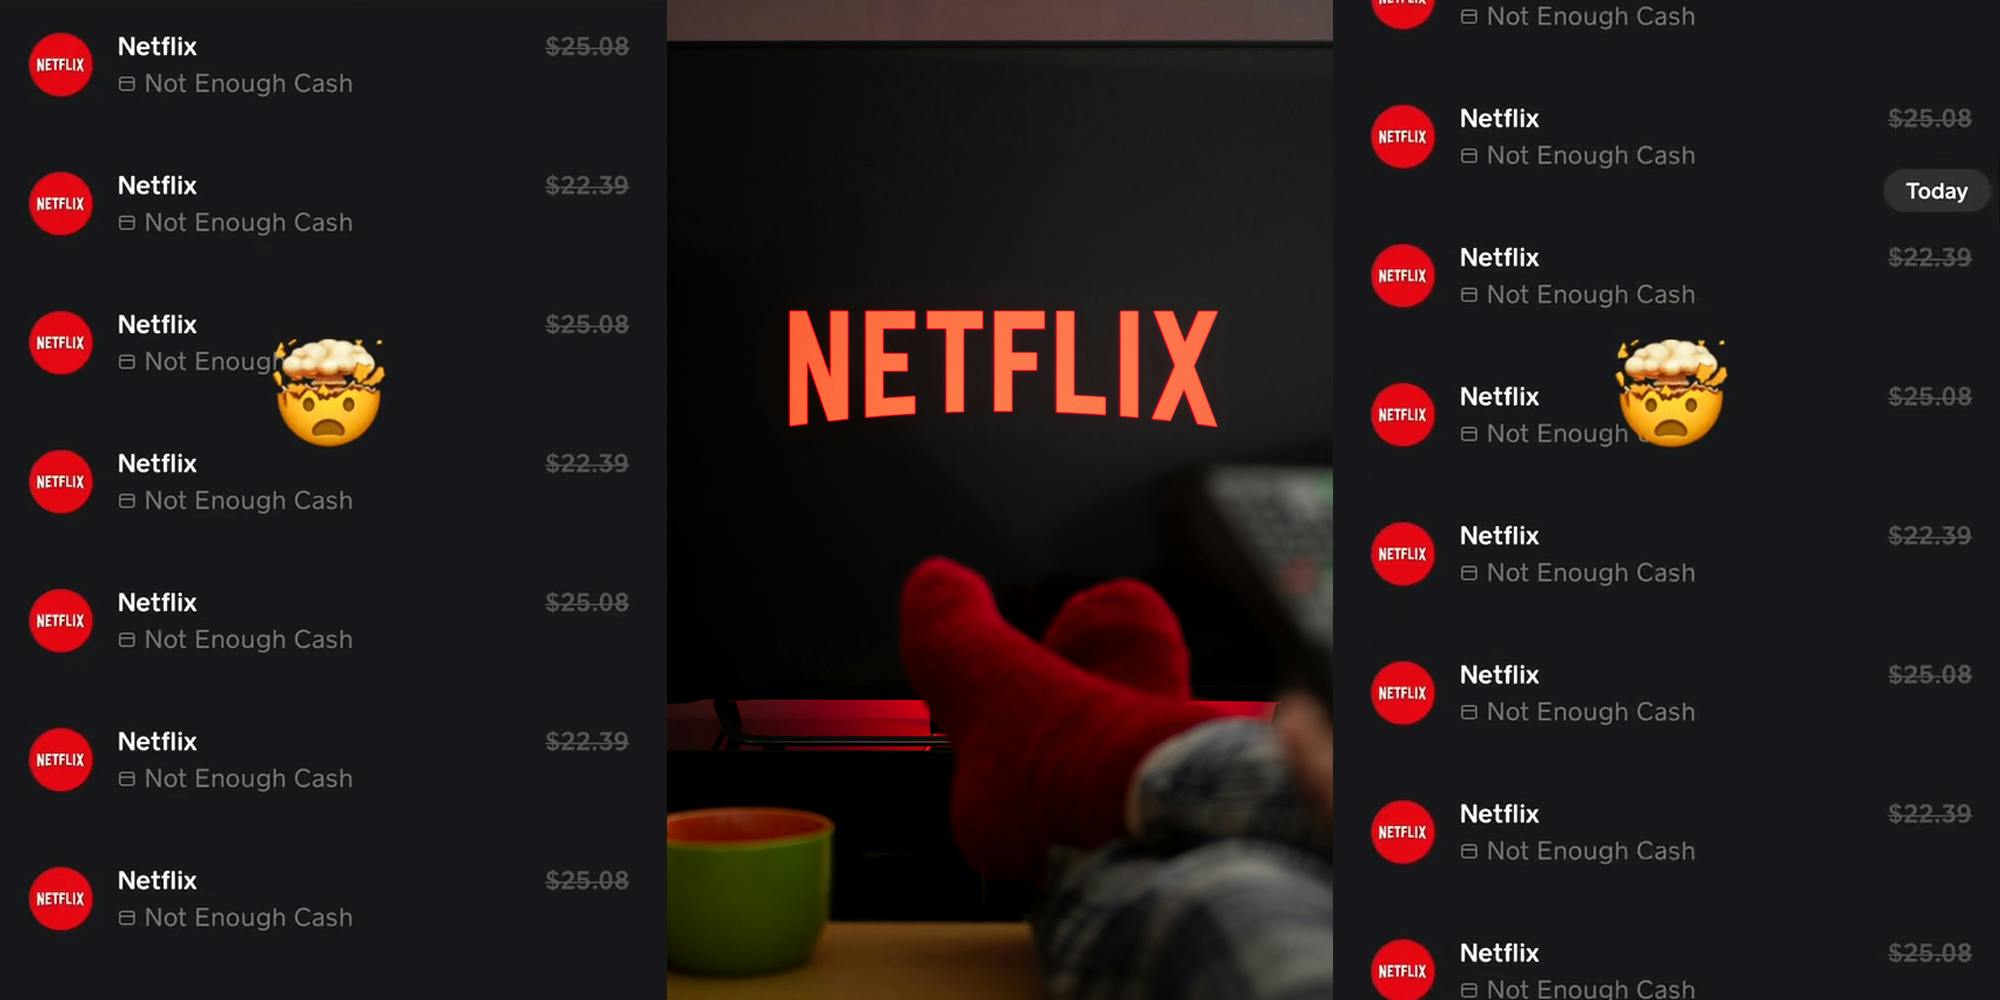 Customer Says Netflix Charged Them 28 Times After Canceling